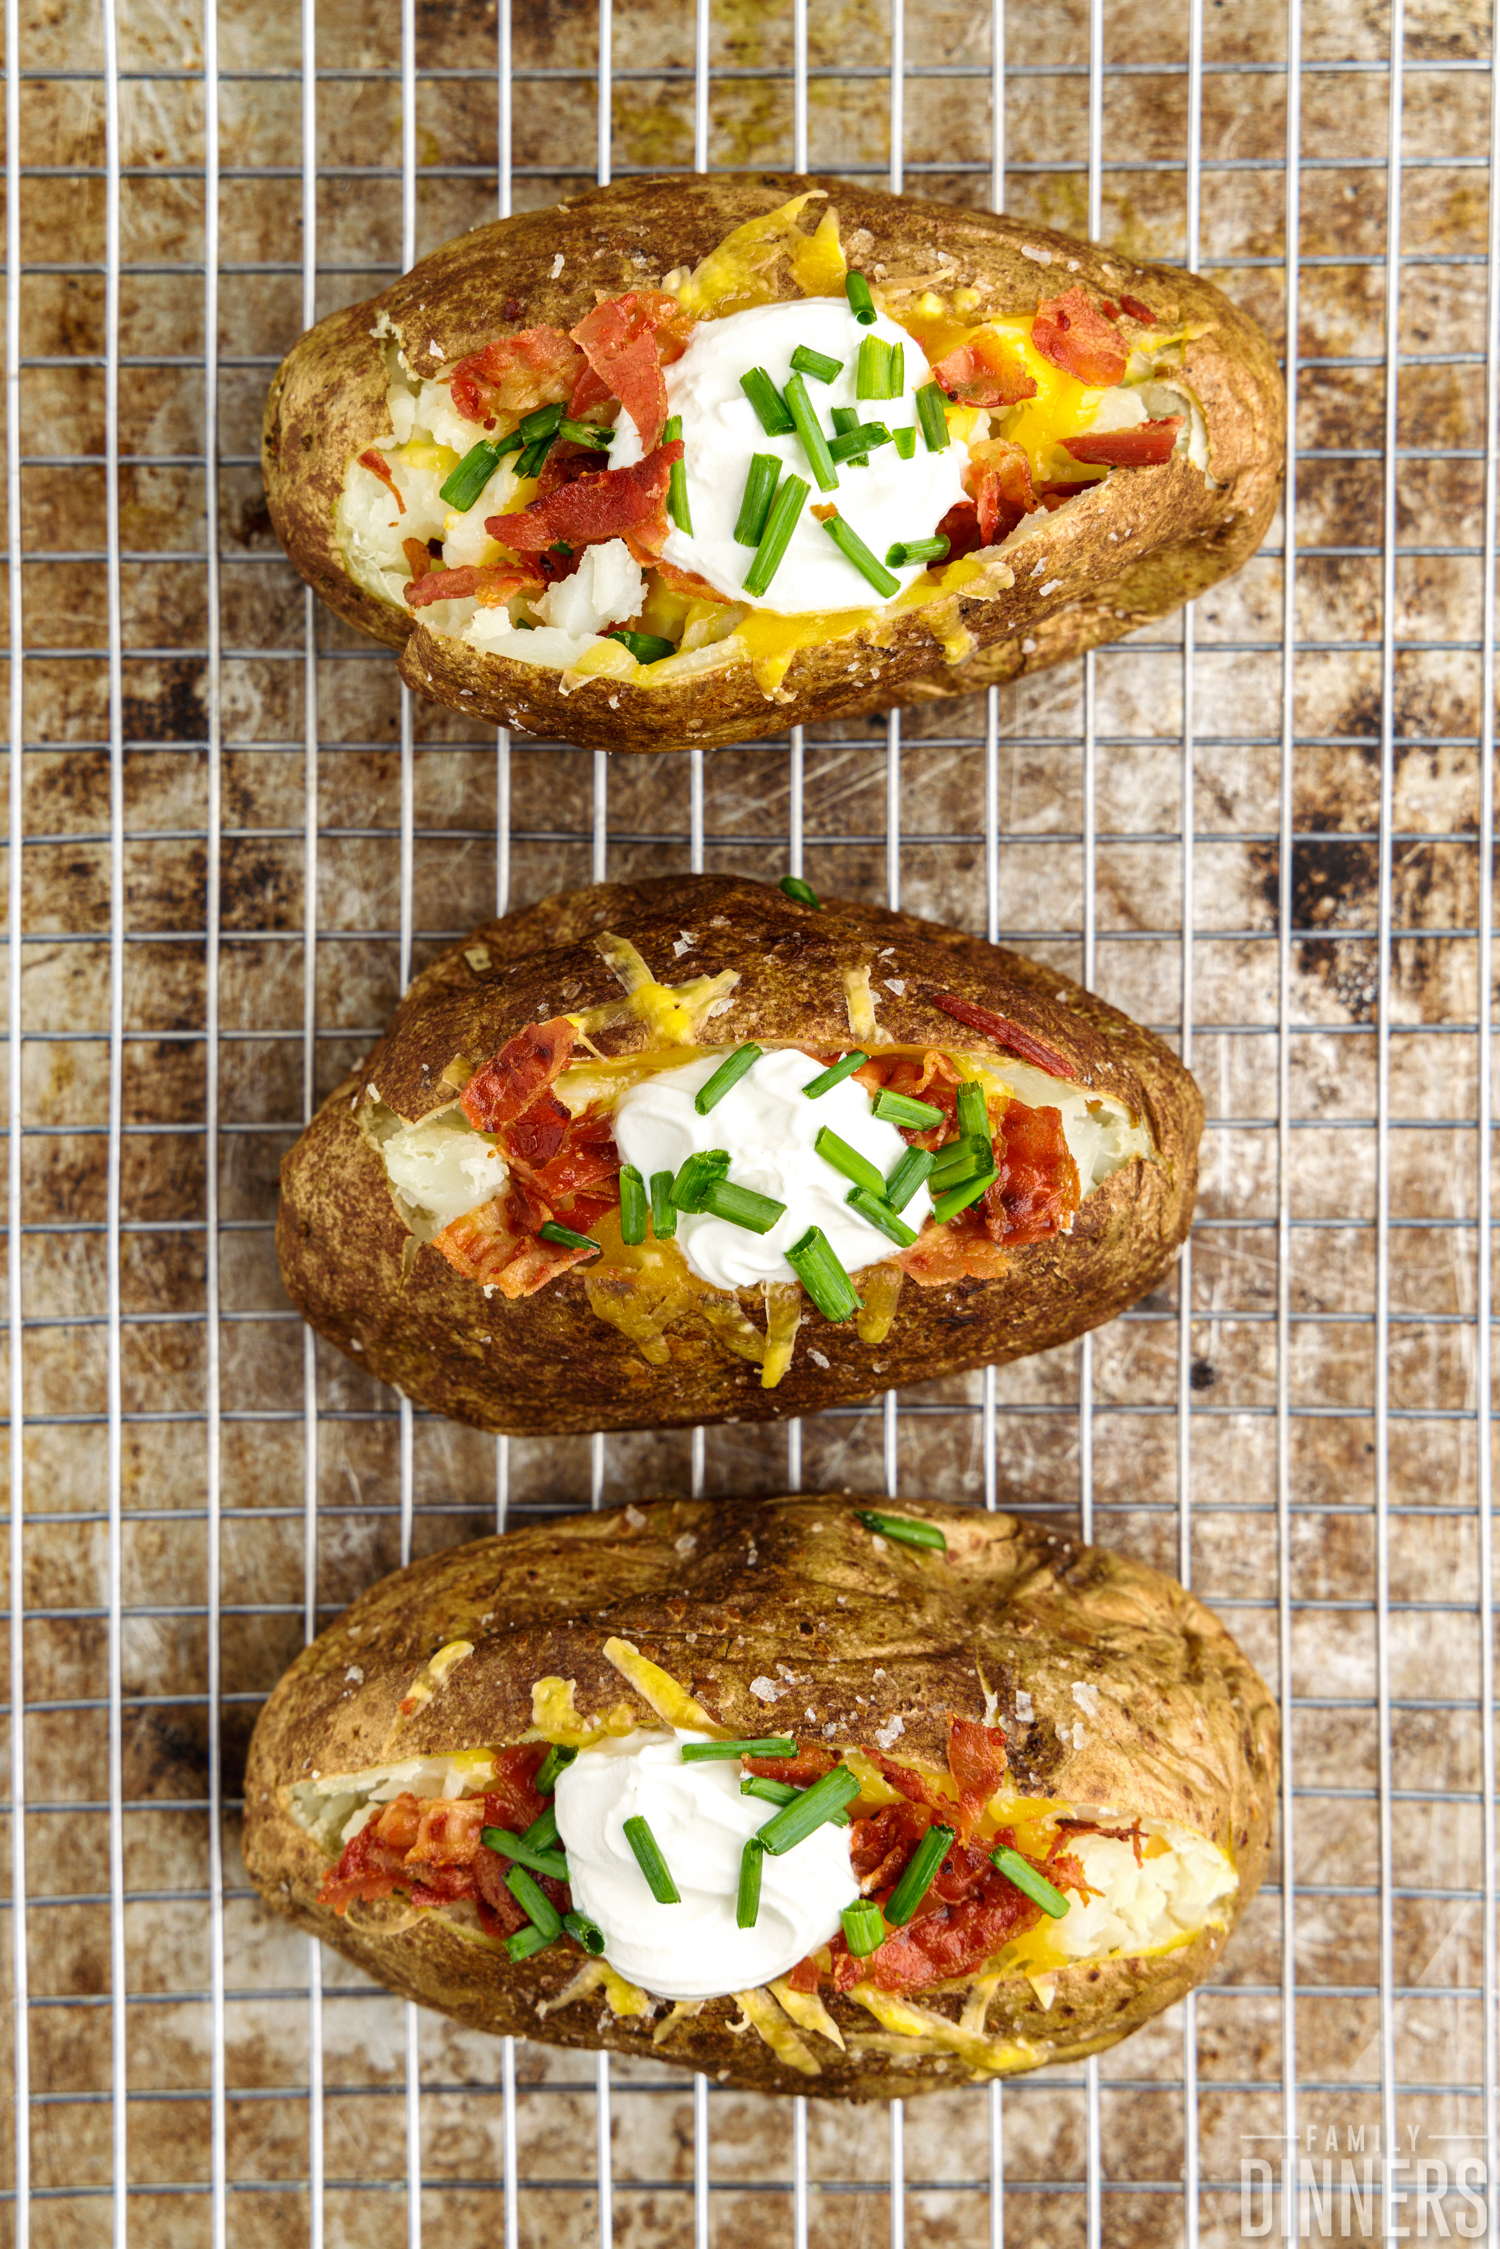 Fully-cooked baked potatoes on wire rack cut open and topped with cheese, sour cream, bacon and green onions.